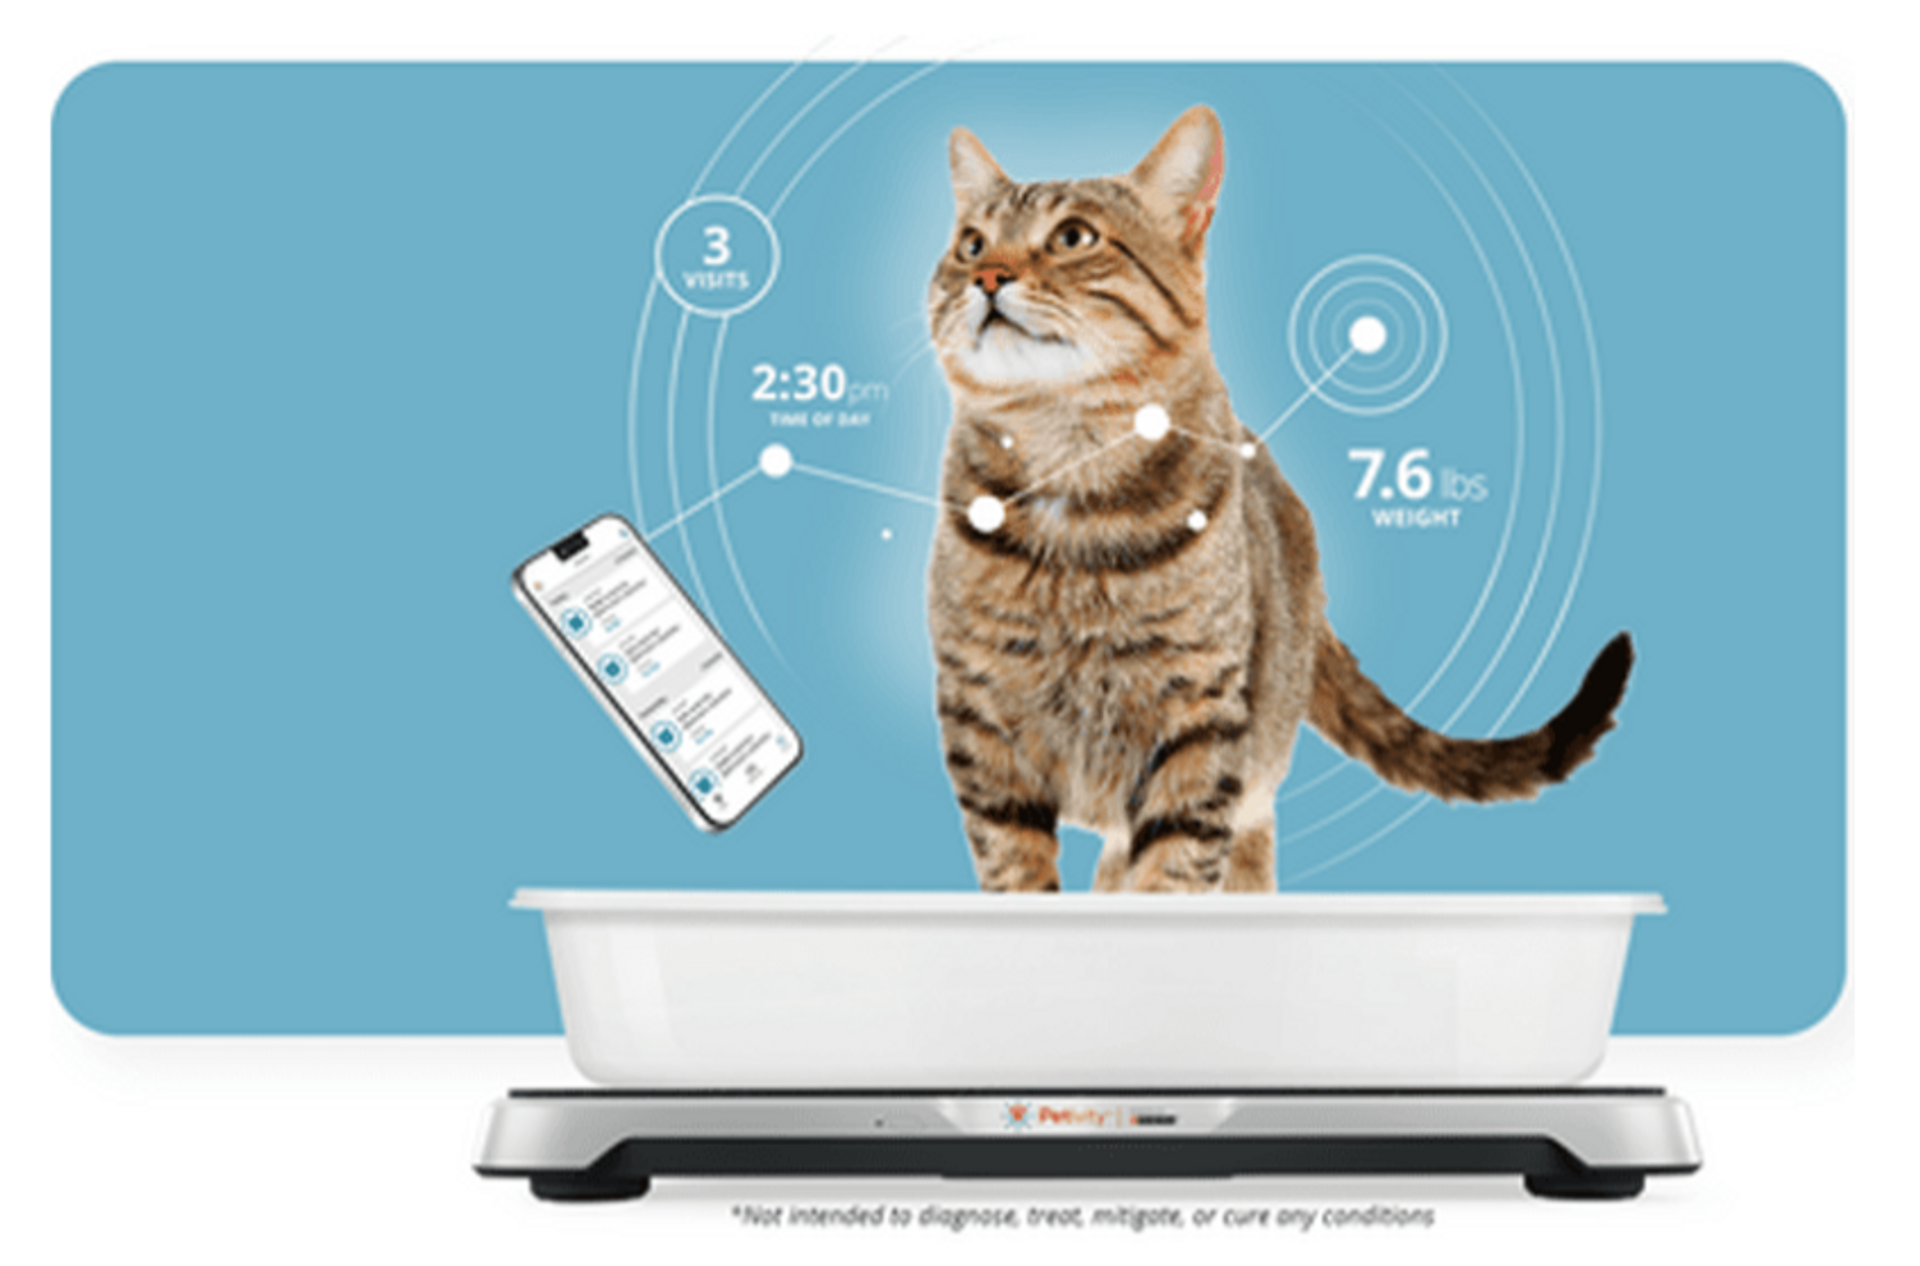 Petivity Litterbox lets cat owners track wellbeing via AI